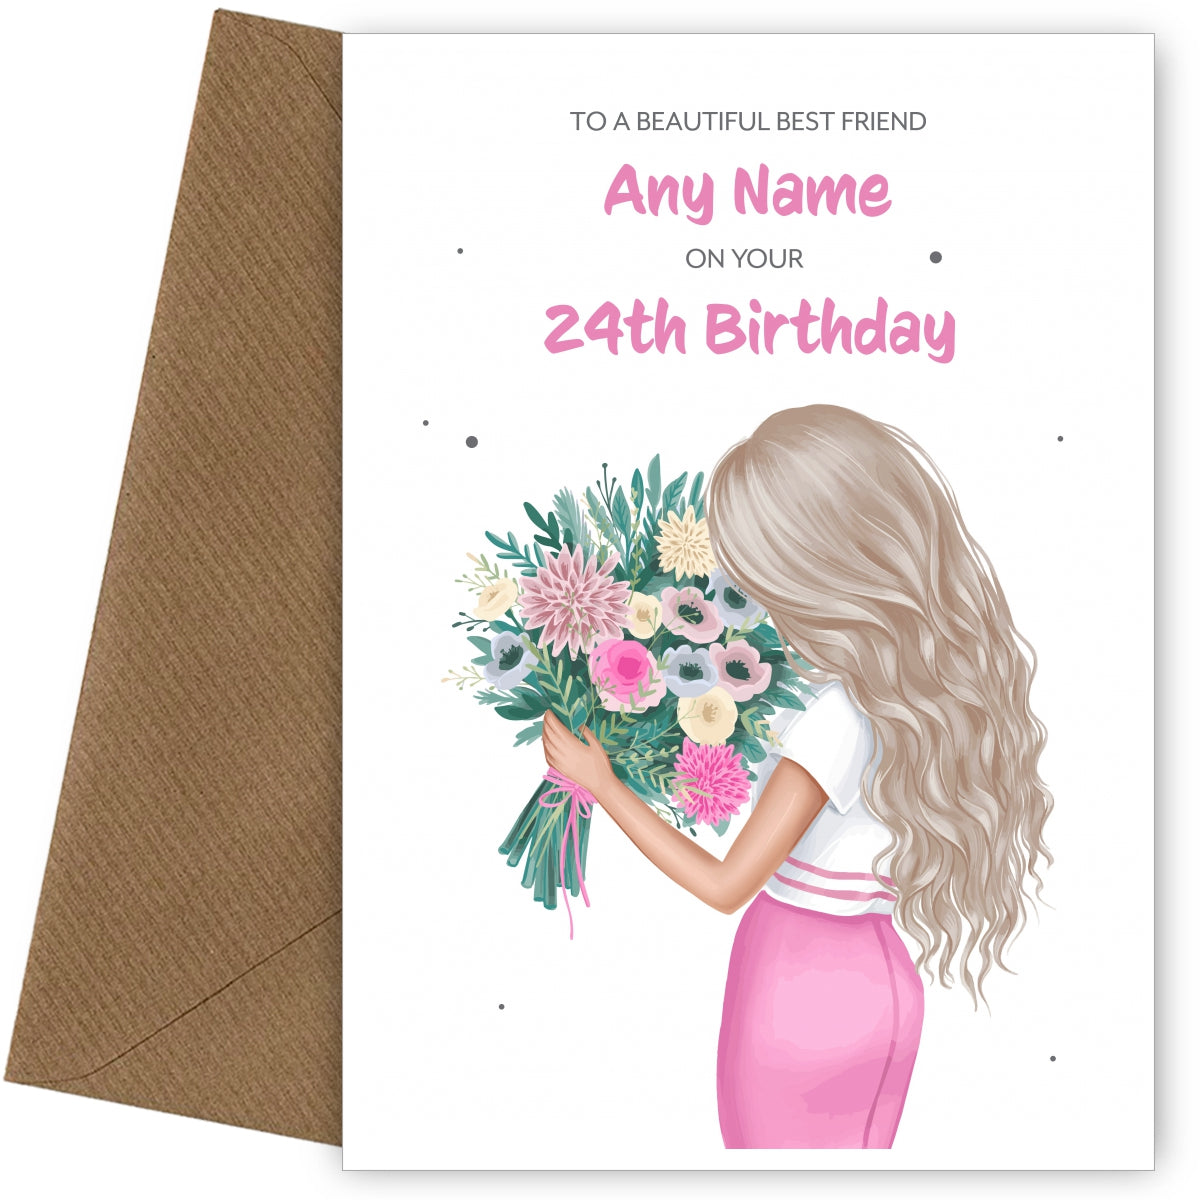 24th Birthday Card for Best Friend - Beautiful Blonde